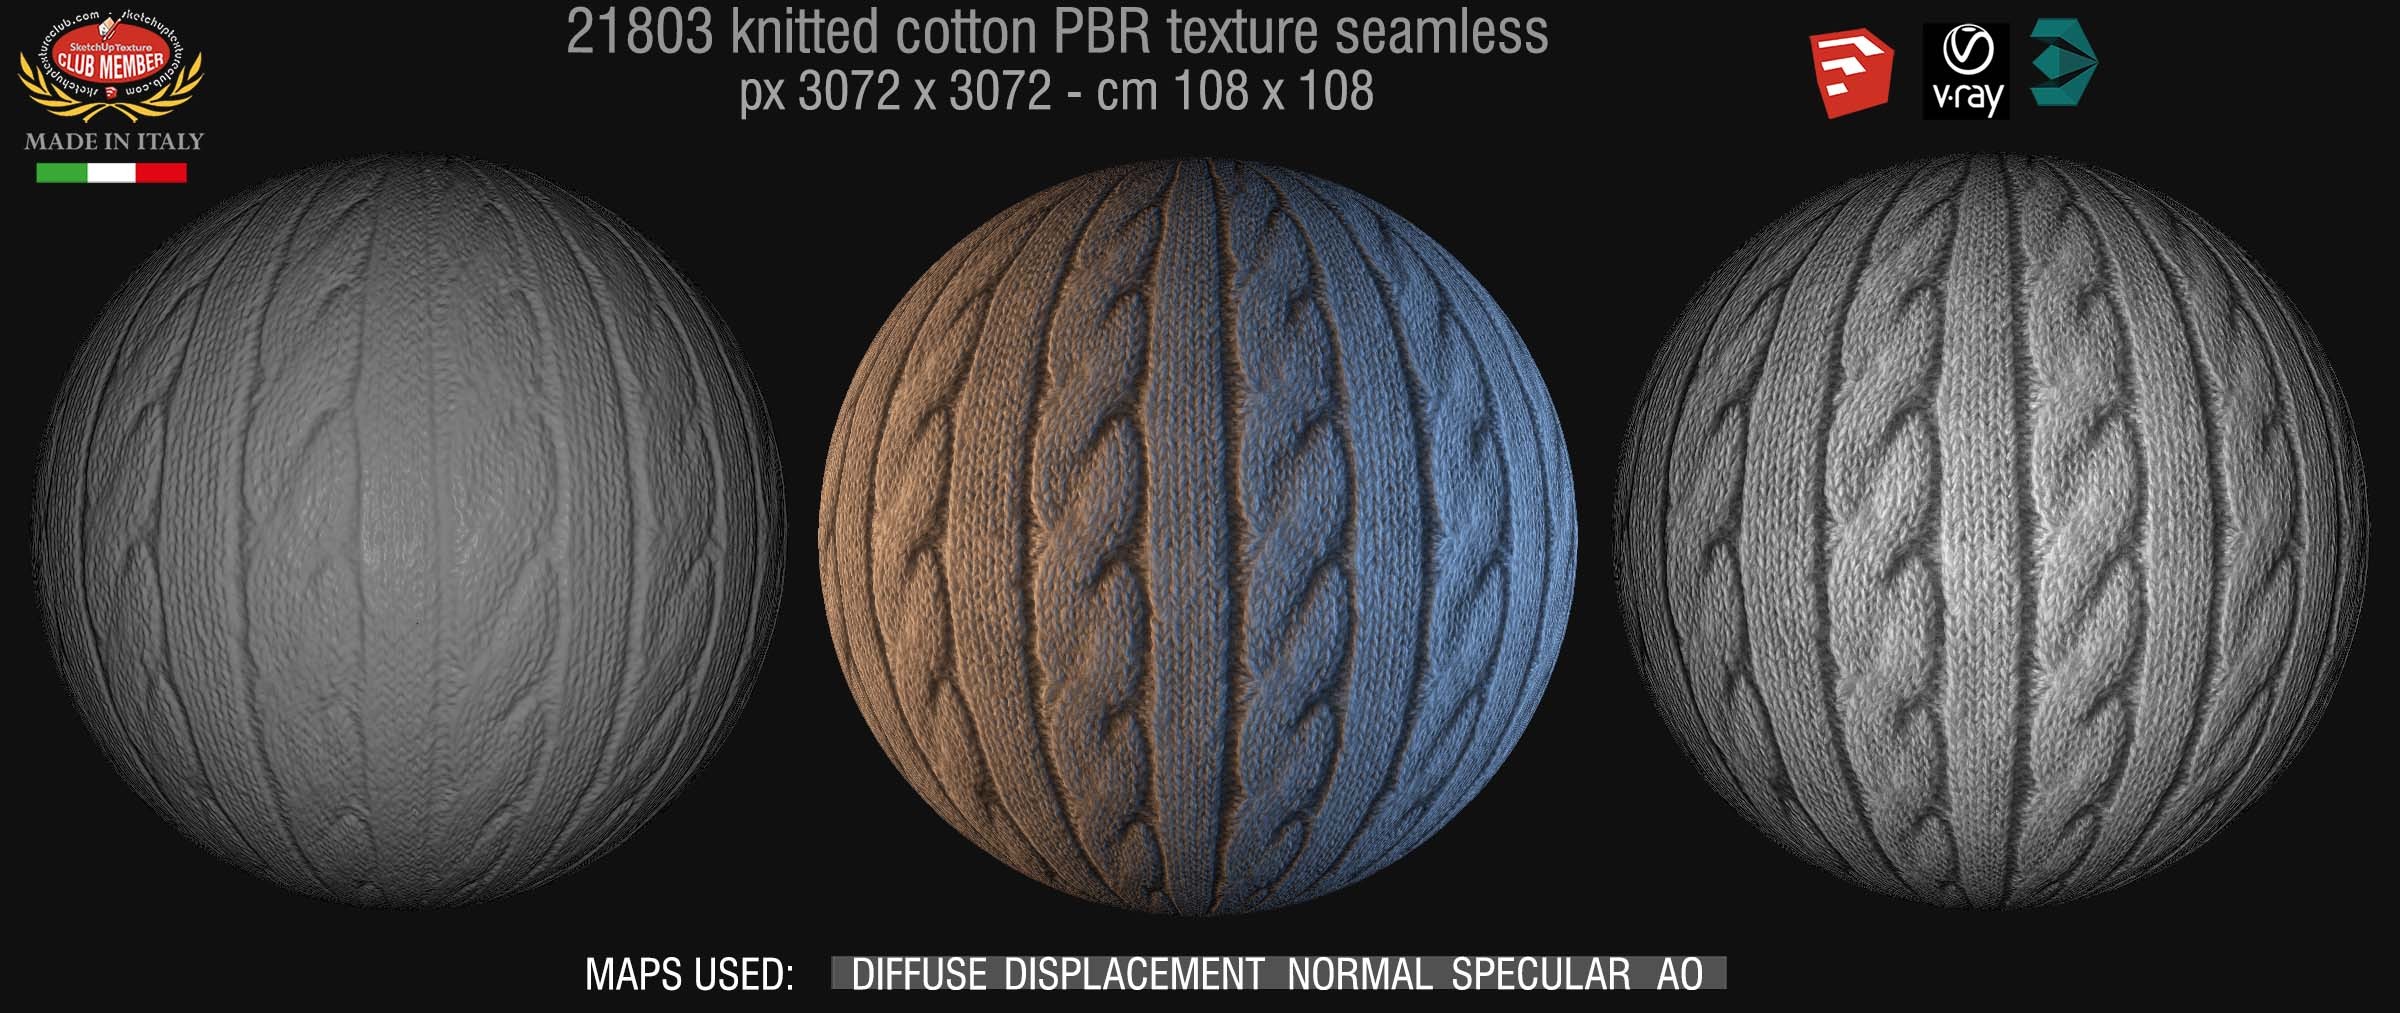 21803 wool knitted PBR texture seamless DEMO